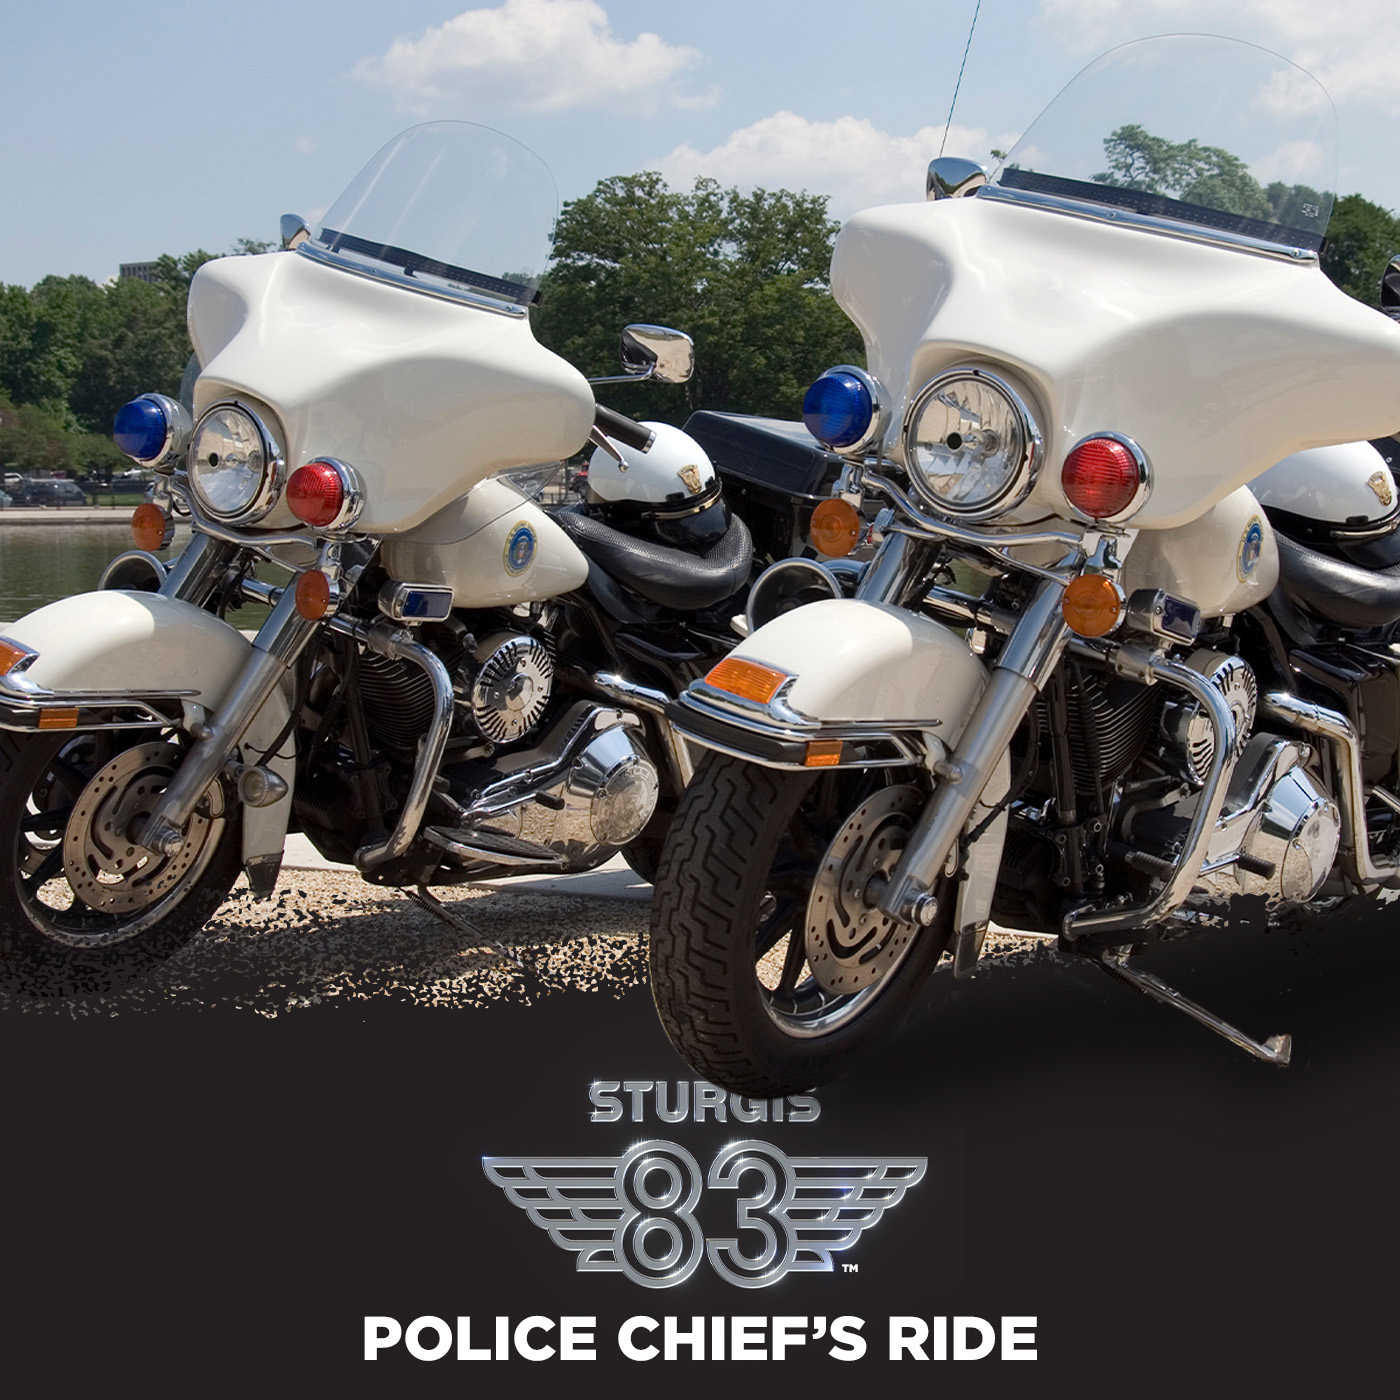 Sturgis Motorcycle Event 2023- Police Chief's ride